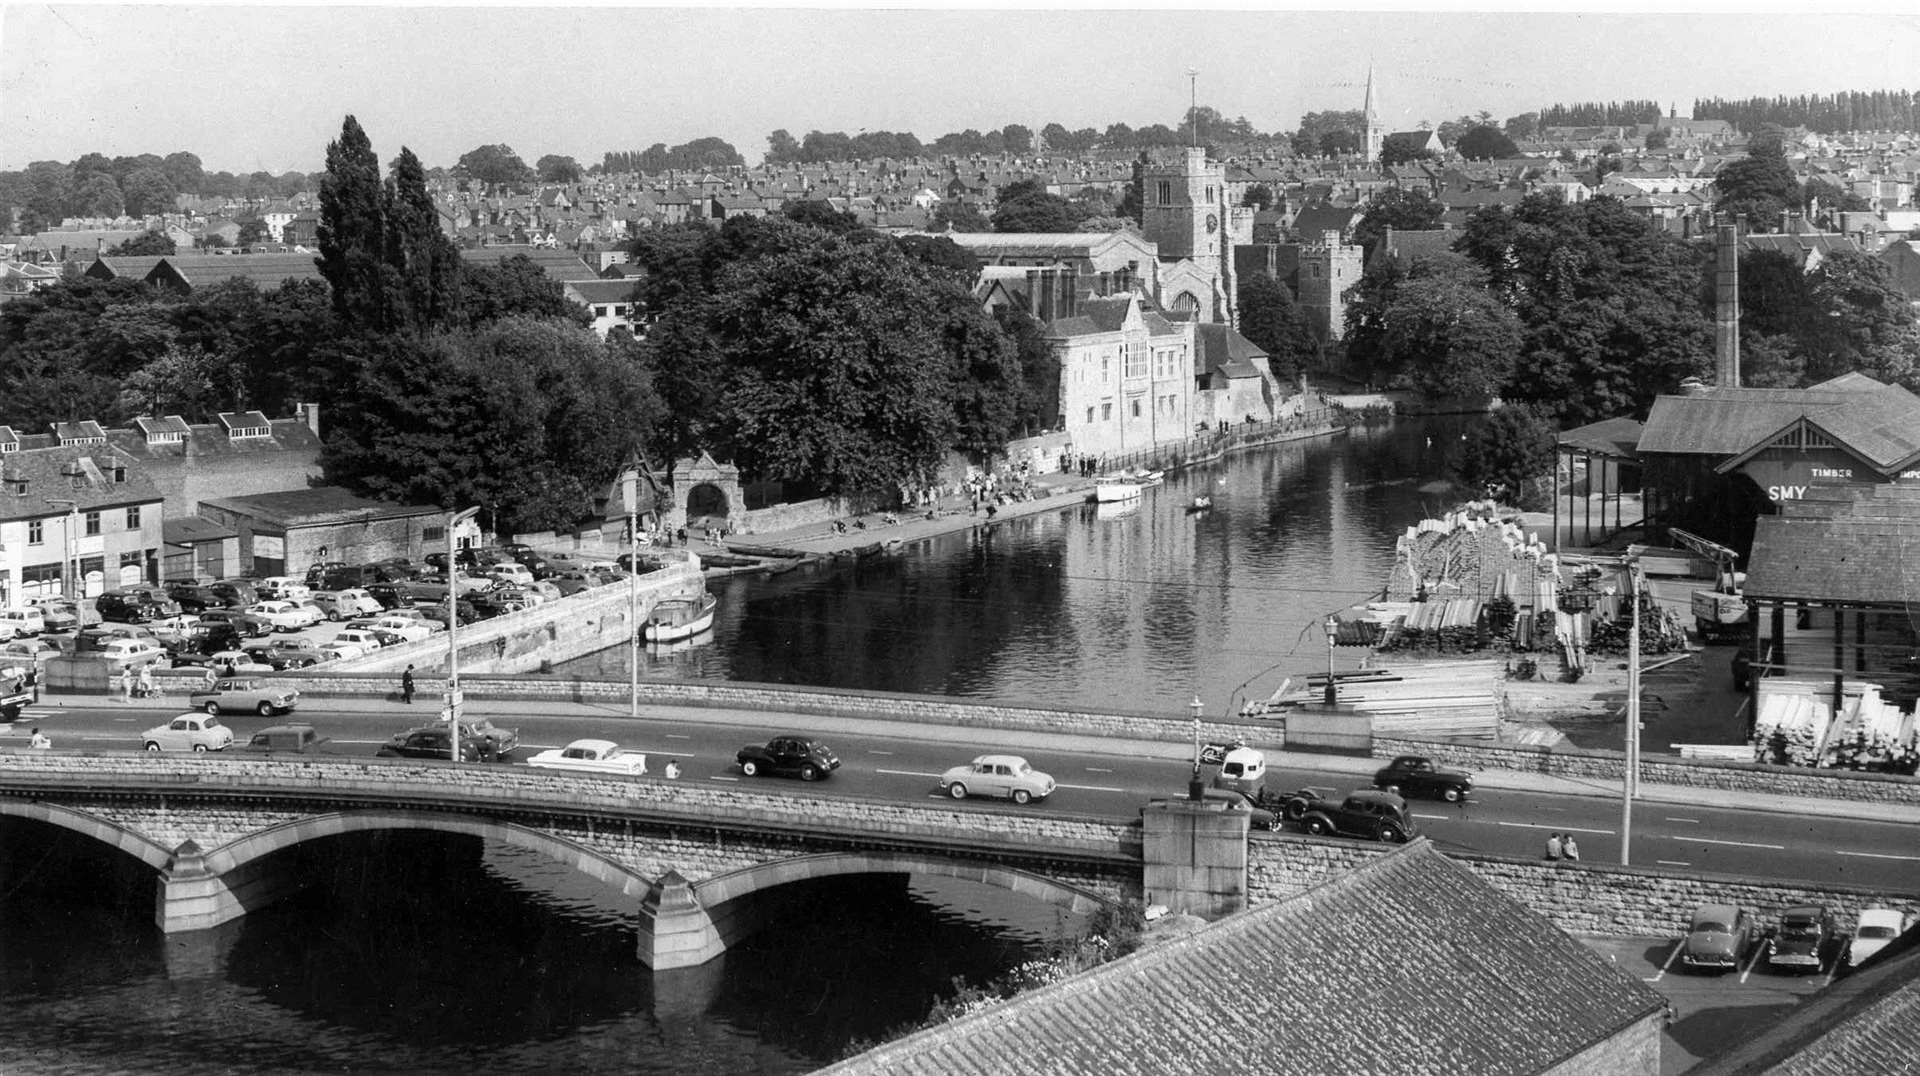 Maidstone bridge was already constantly jammed with traffic by 1960. One of the first major road schemes opened up Bishop's Way in 1964. The impact on the landscape is clearly shown in the picture taken in 1967